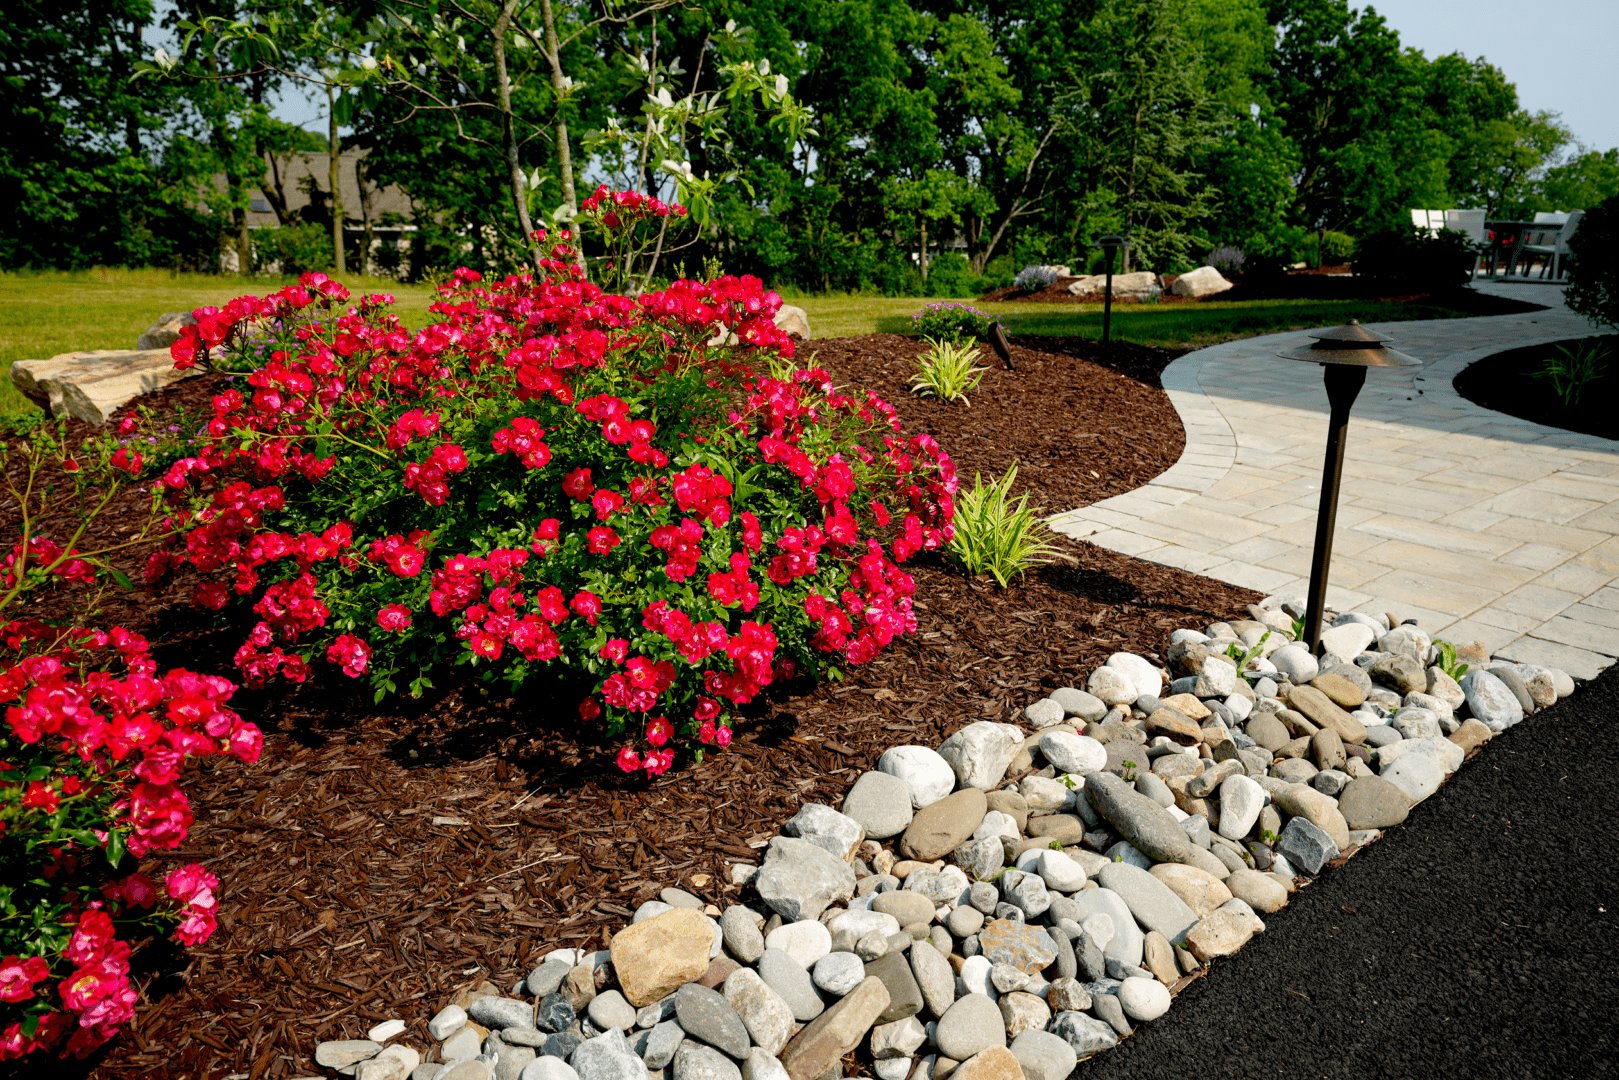 A walkway adorned with vibrant red flowers and natural rocks, creating a picturesque scene in the outdoor lighting.